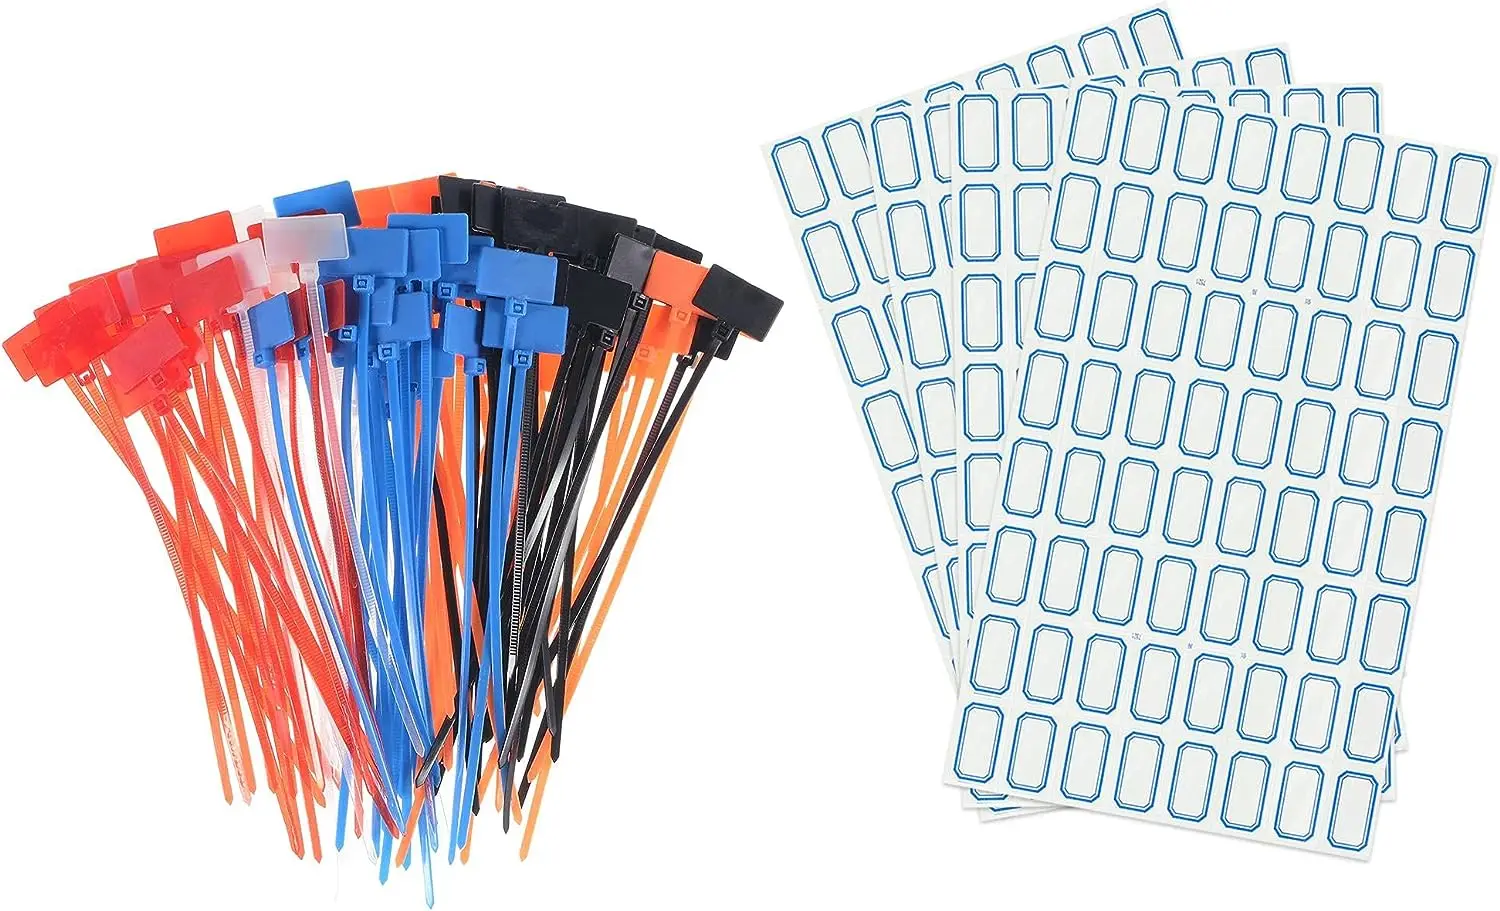 

Tcenofoxy 100pcs Nylon Cable Ties Tags Label Marker Self-Locking for Marking Organizing 5 Colors